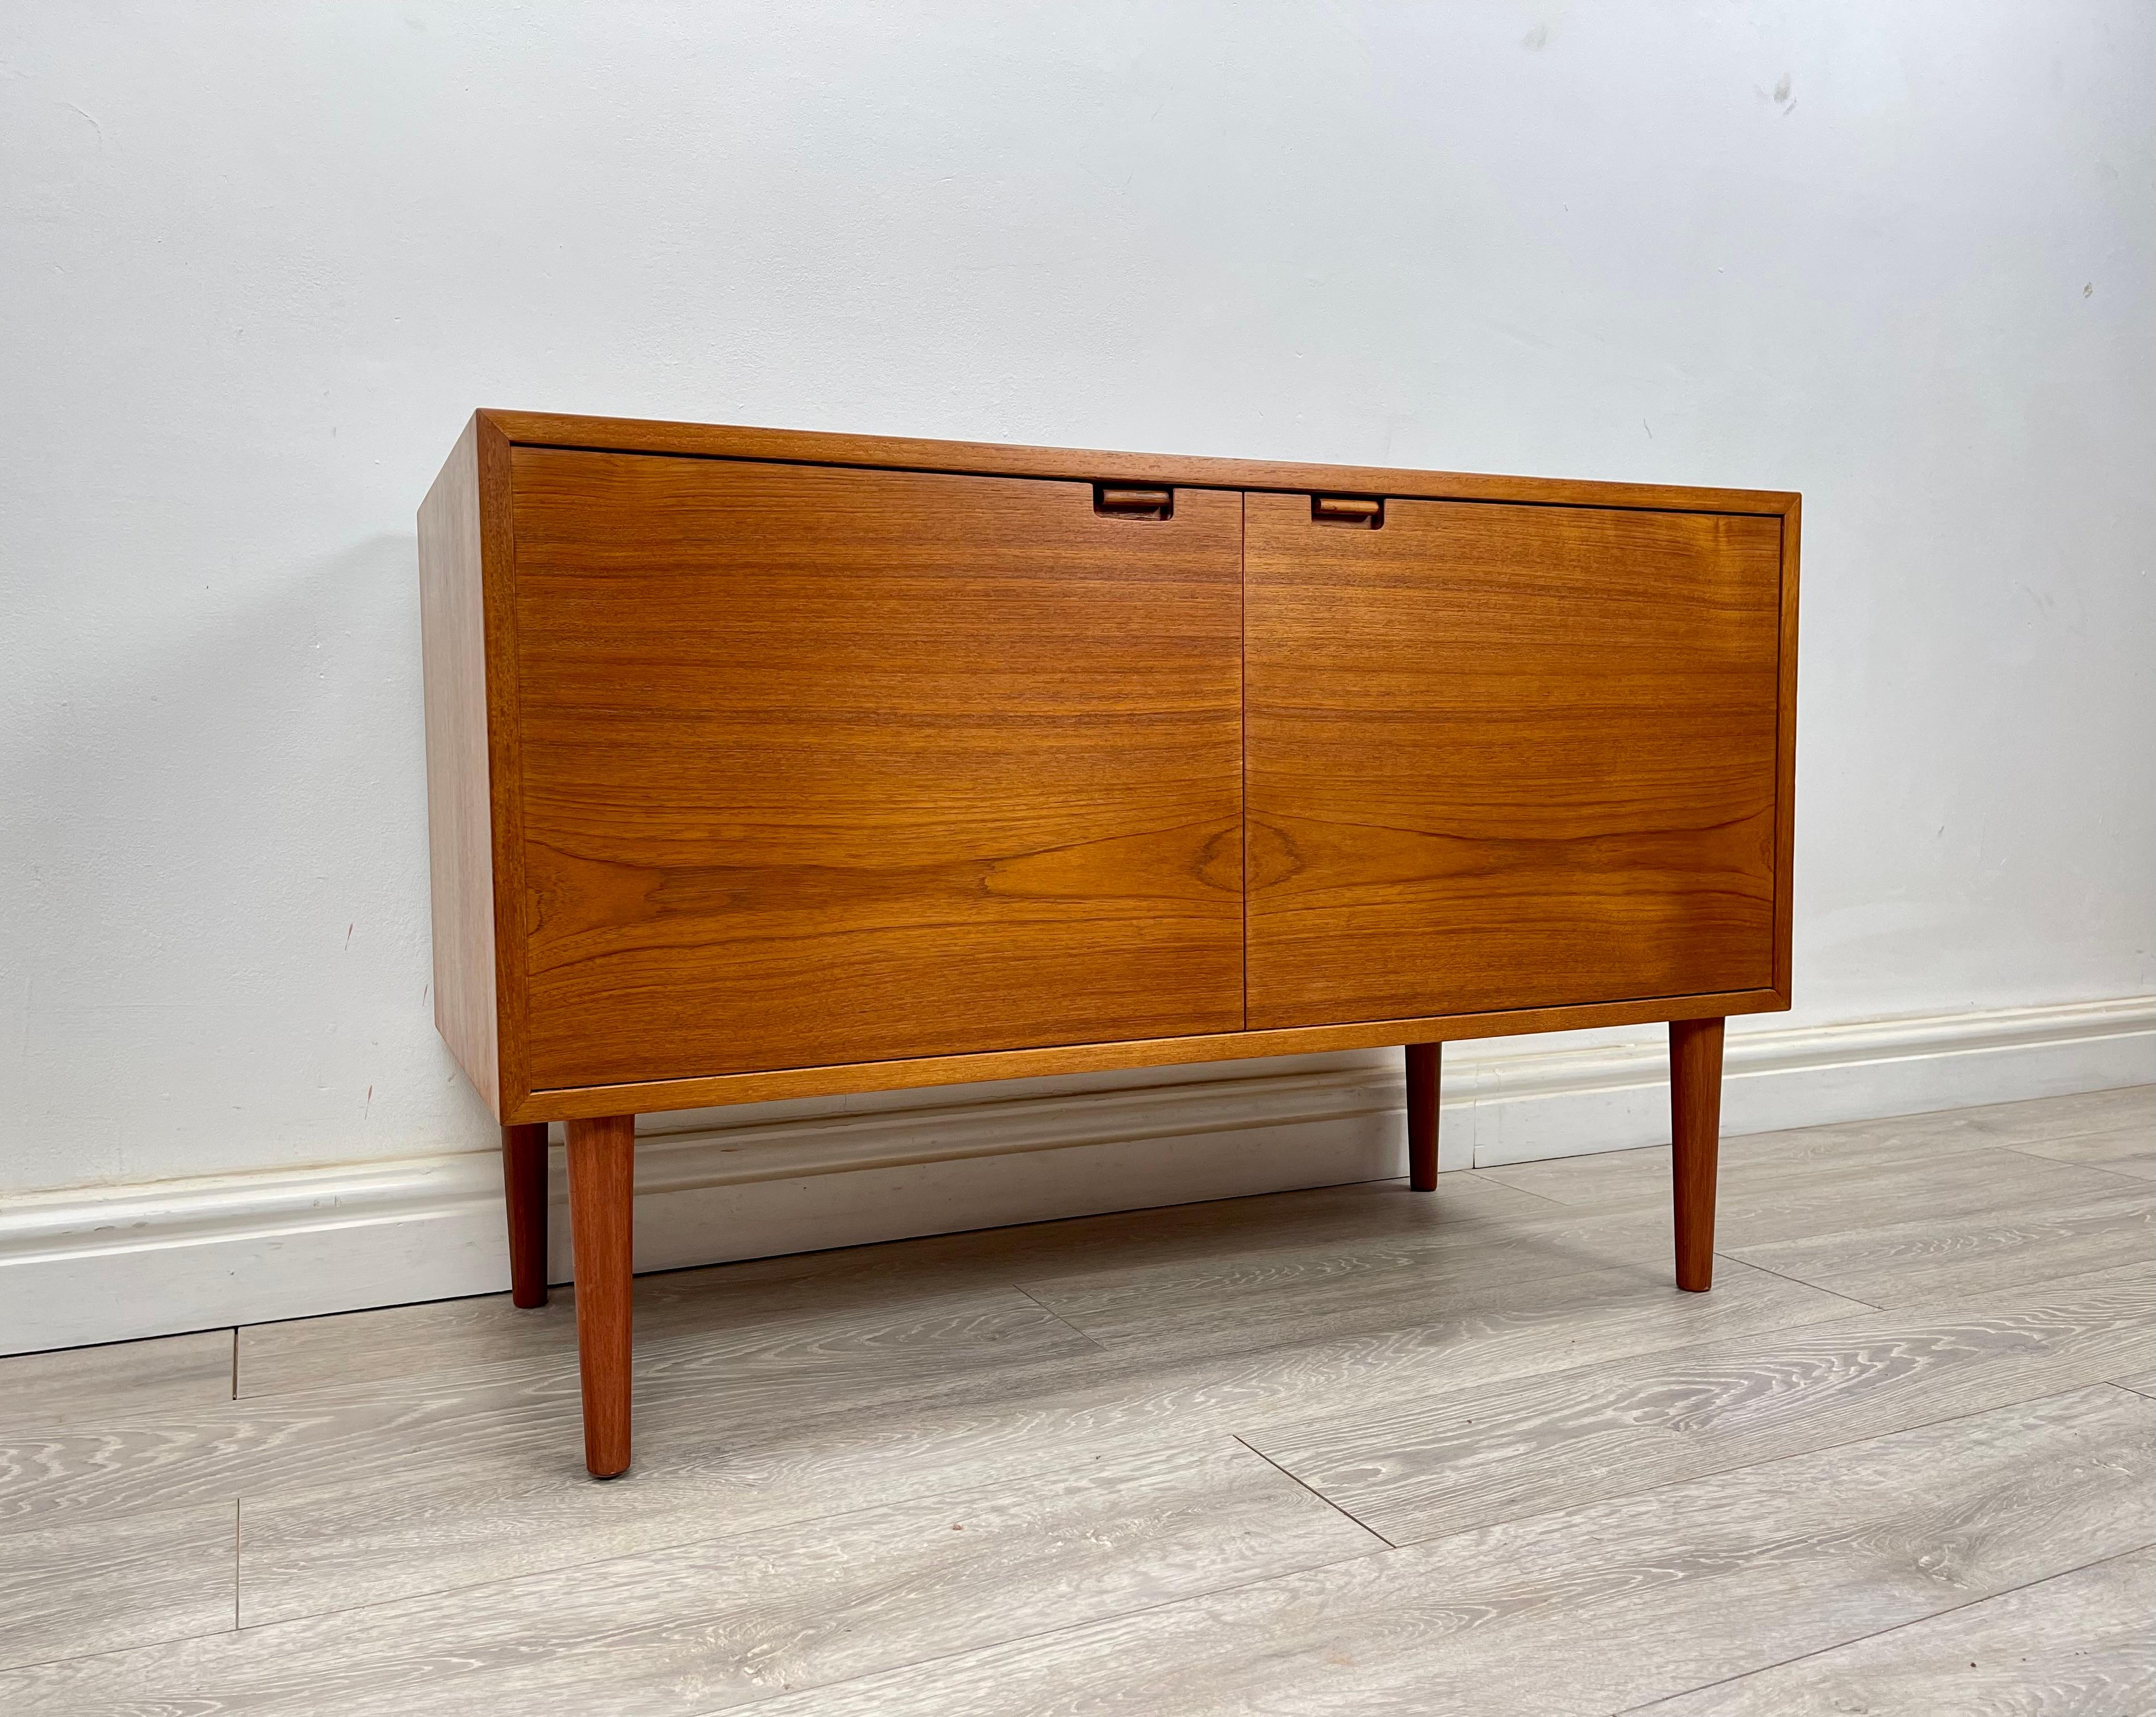 SIDEBOARD 
Stunning Midcentury Danish teak sideboard/ cabinet made by Sejling Skabe circa 1970s.

The sideboard stands on round tapered legs has stunning grain and golden patina throughout.

There’s two single cupboards with two adjustable